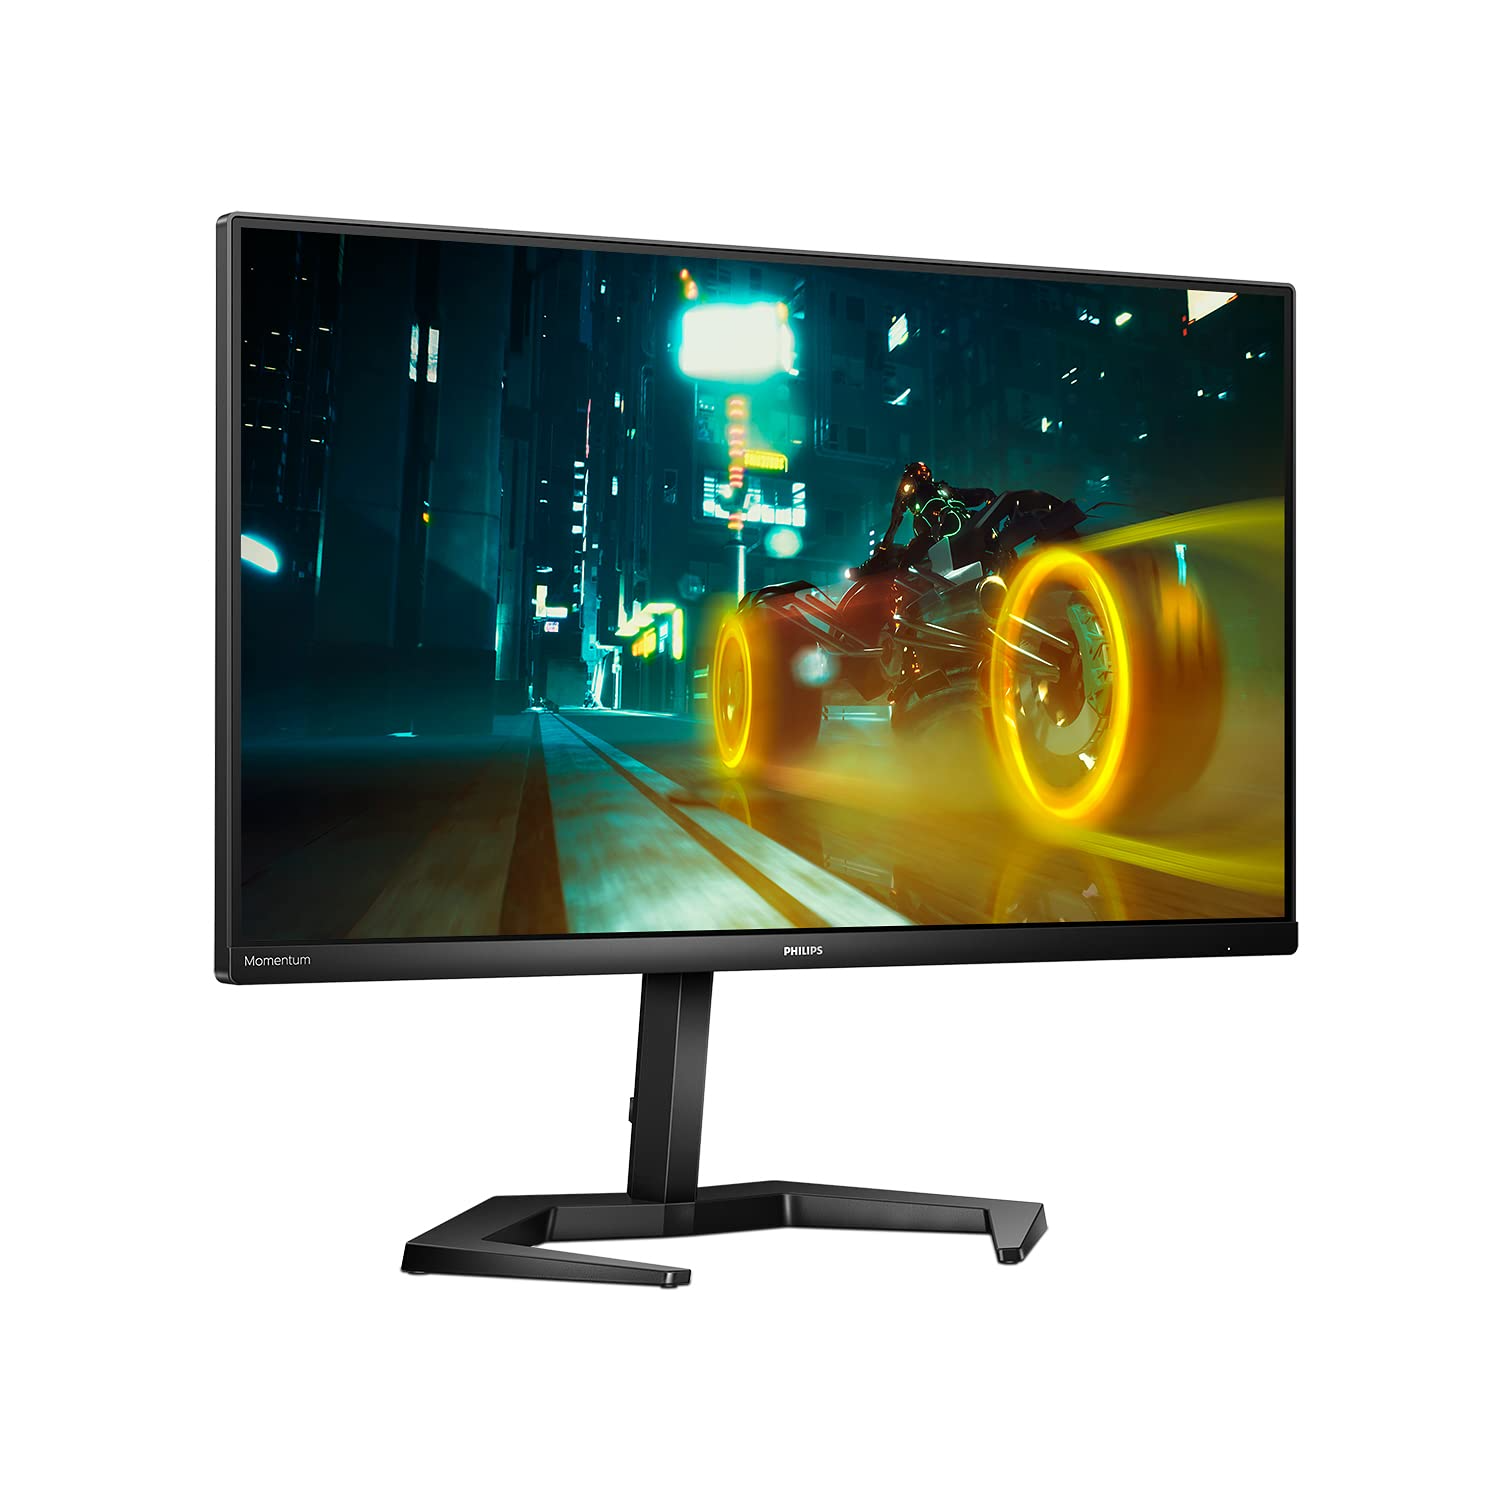 Monitor 23.8" Philips Evnia 3000 Gaming FHD 165Hz - Albagame